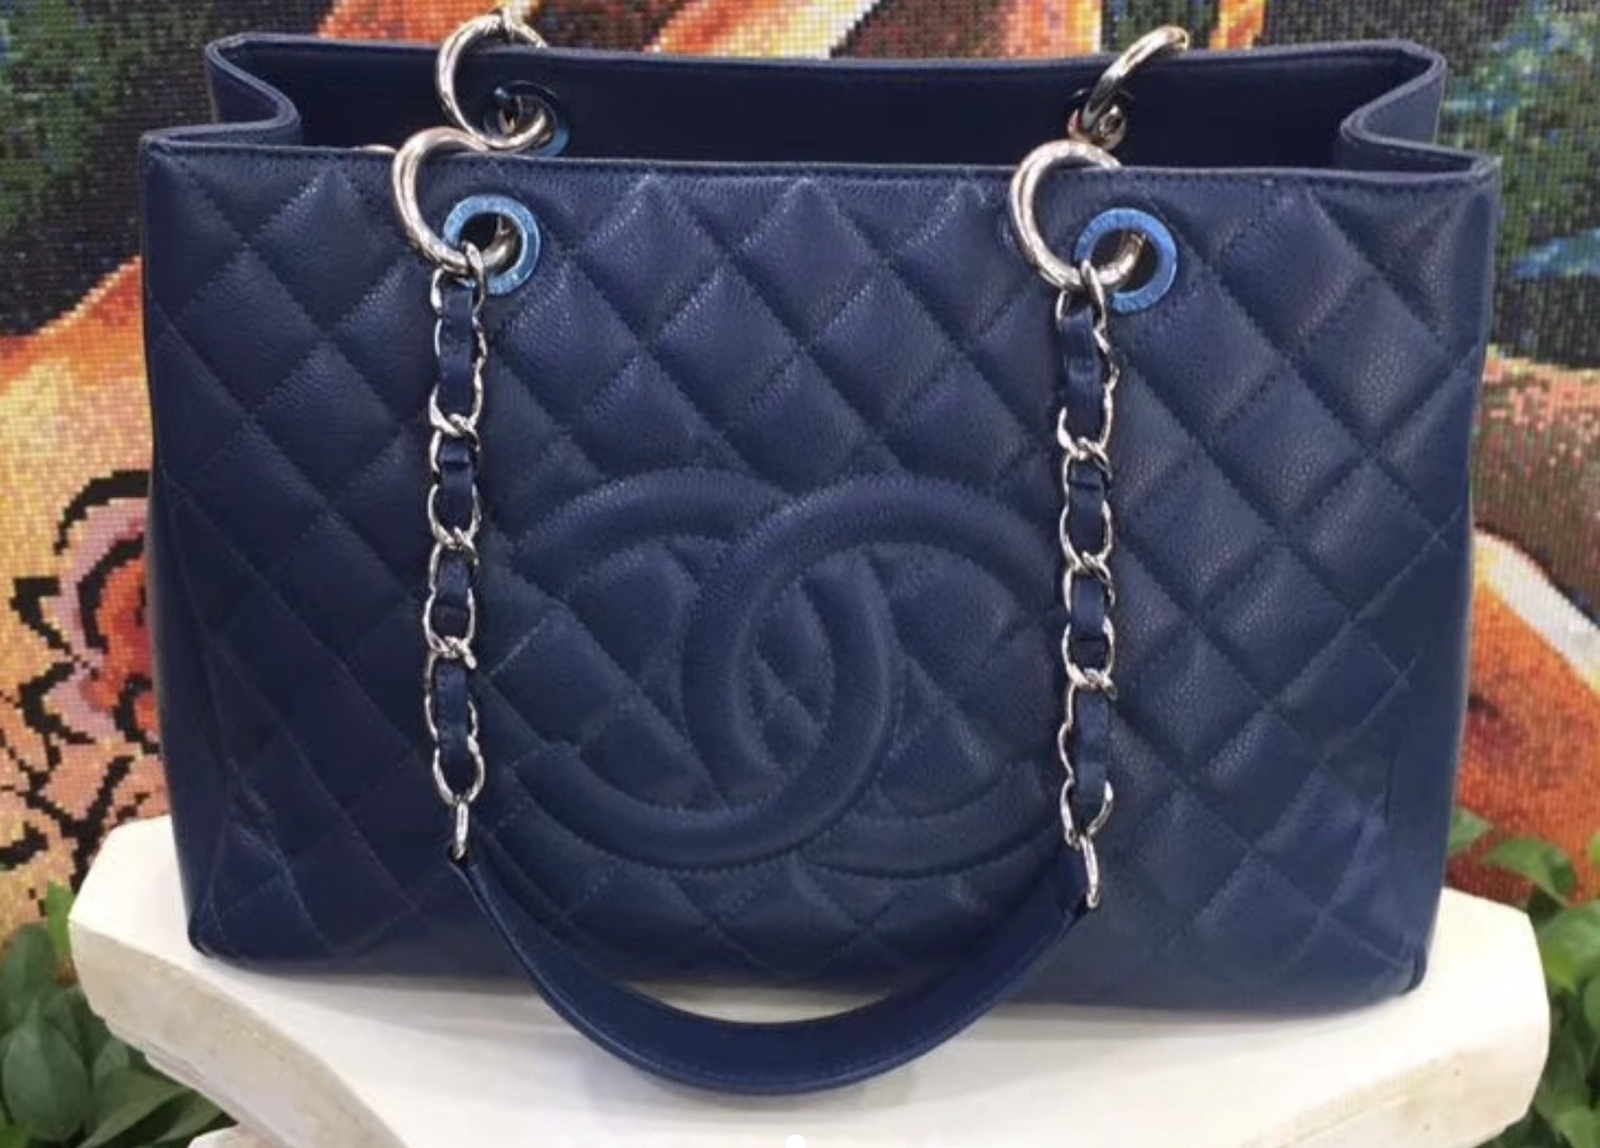 Chanel Quilted Handbags | IQS Executive